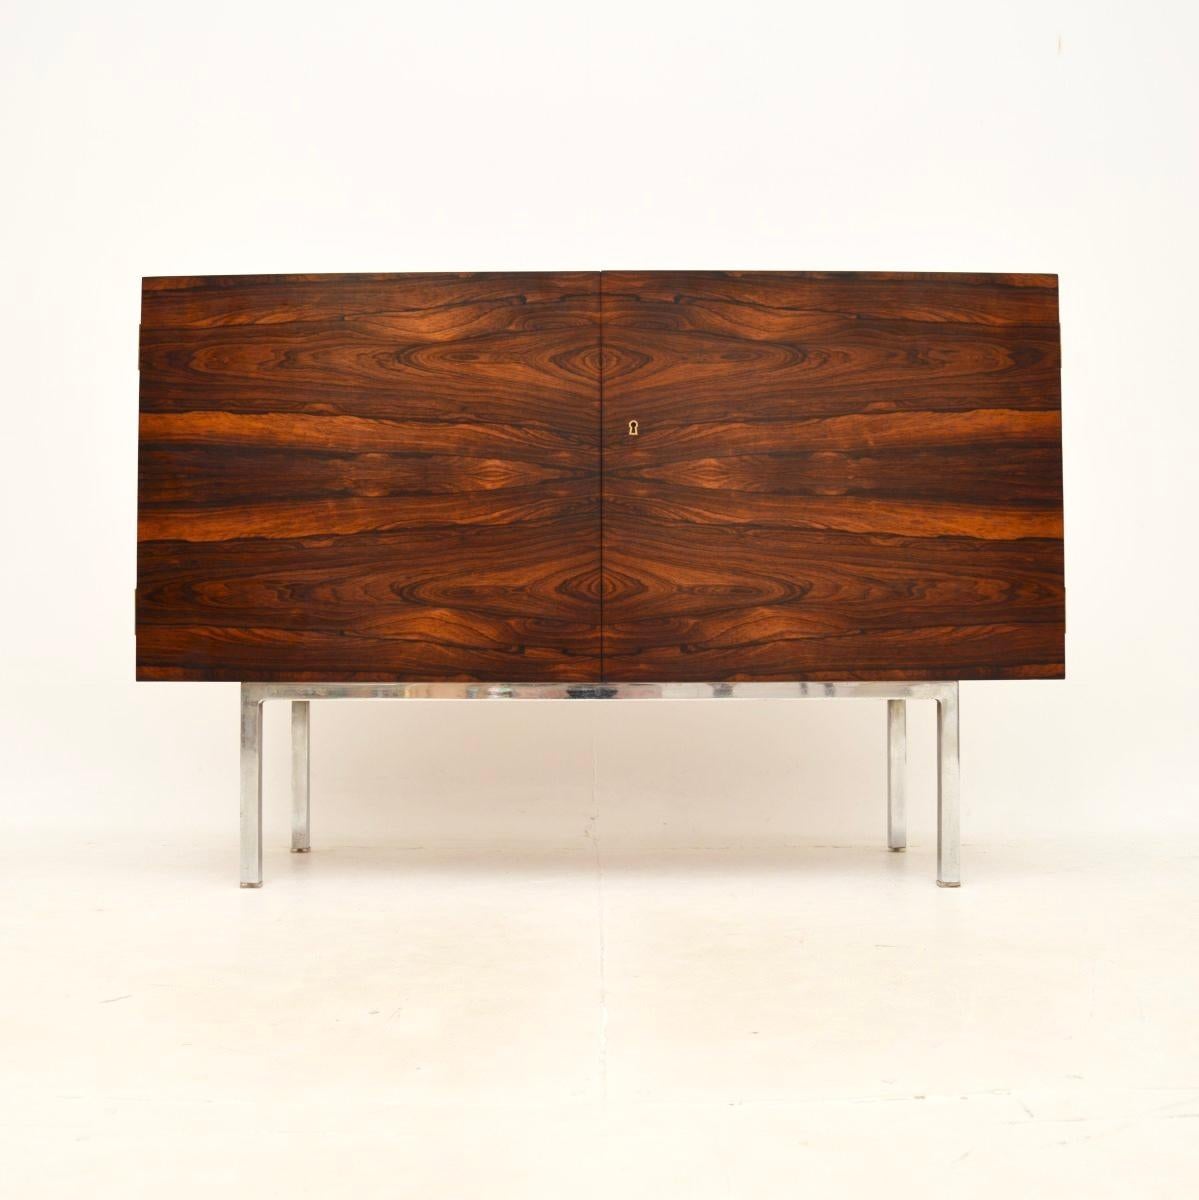 An absolutely stunning vintage sideboard, this was made in Germany and dates from the 1960’s.

It is of outstanding quality and is a lovely, very useful size. The wood is beautifully bookmatched all over, giving an extremely striking effect. There